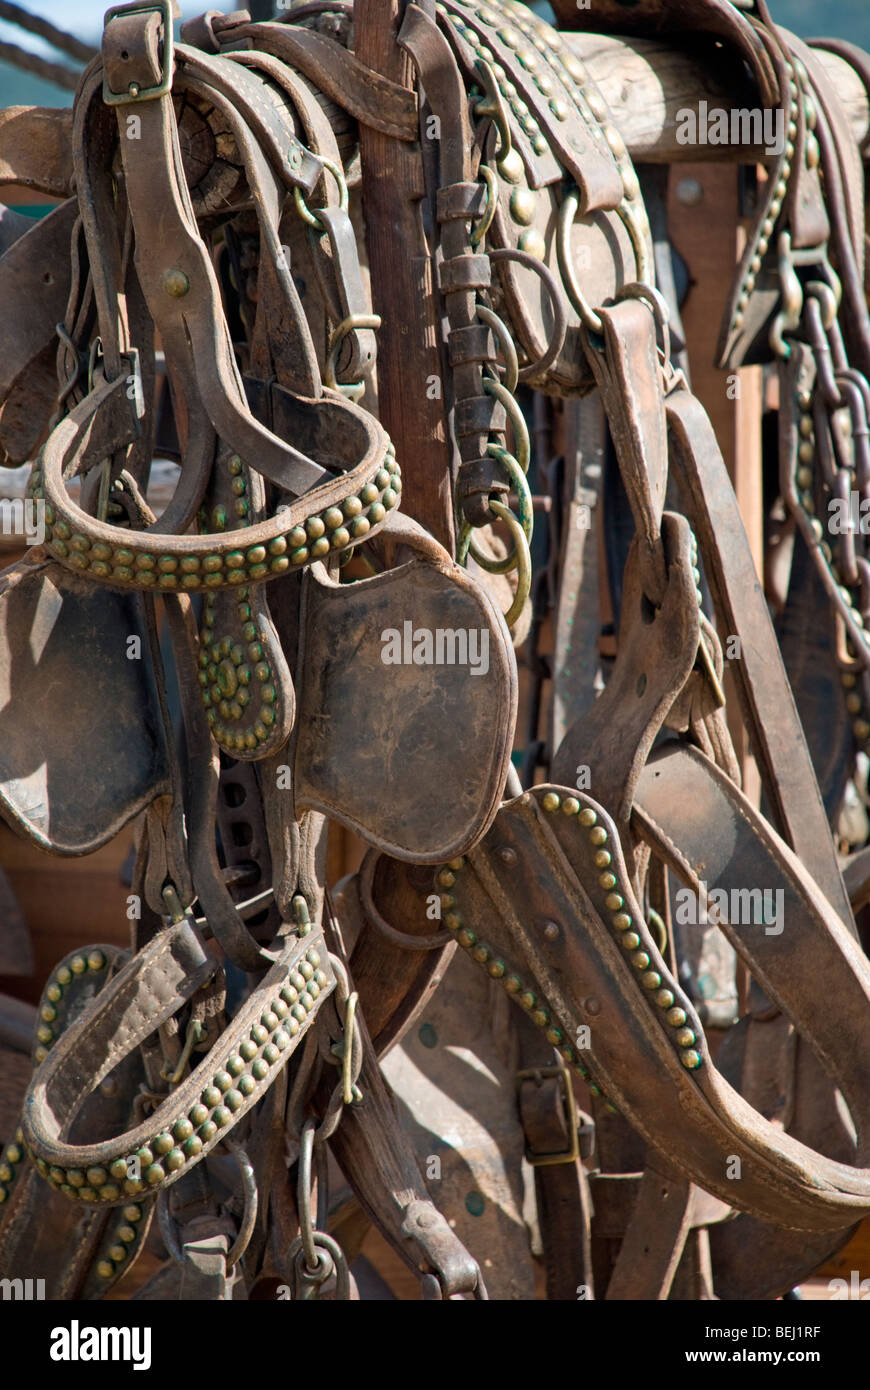 Tack and harness are displayed on one of the chuck wagons at the annual Cowboy Symposium in Ruidoso Downs, New Mexico. Stock Photo